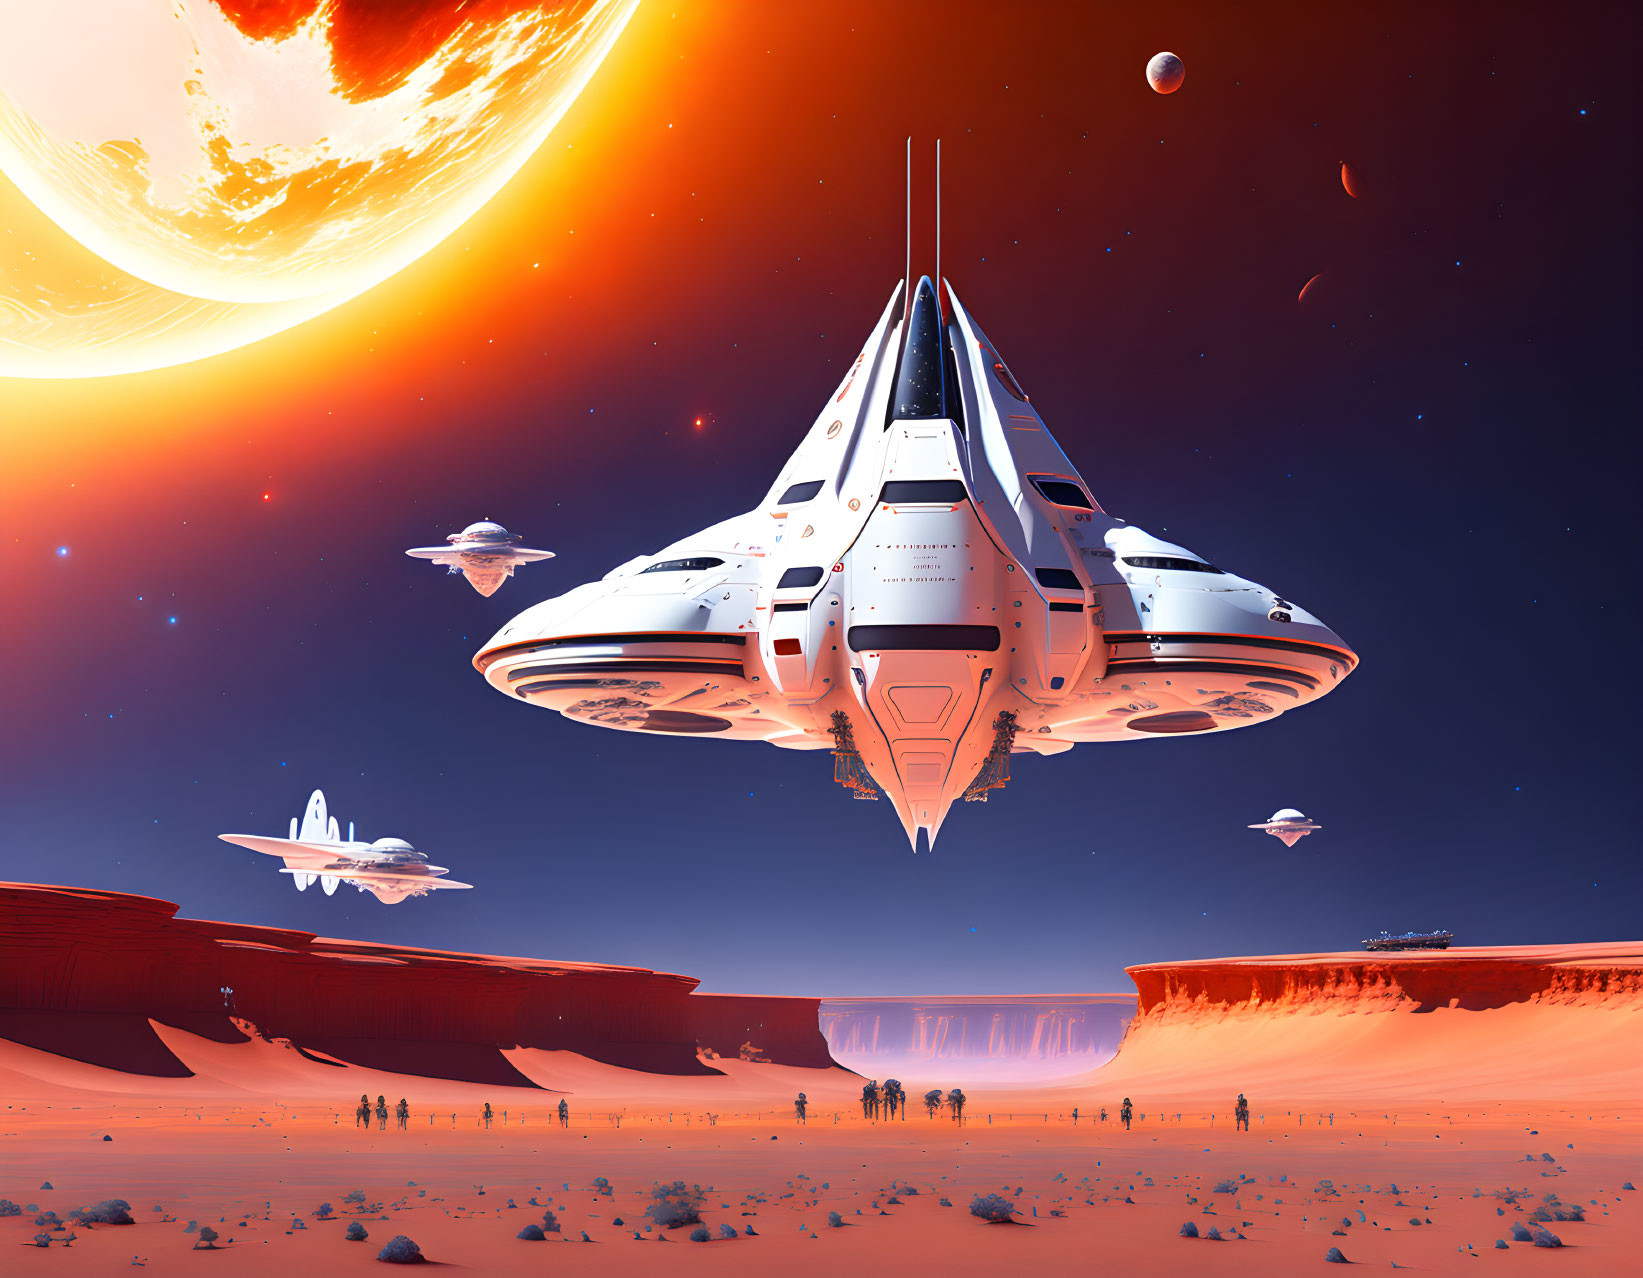 Futuristic spaceships land on alien desert planet with explorers and large reddish moon